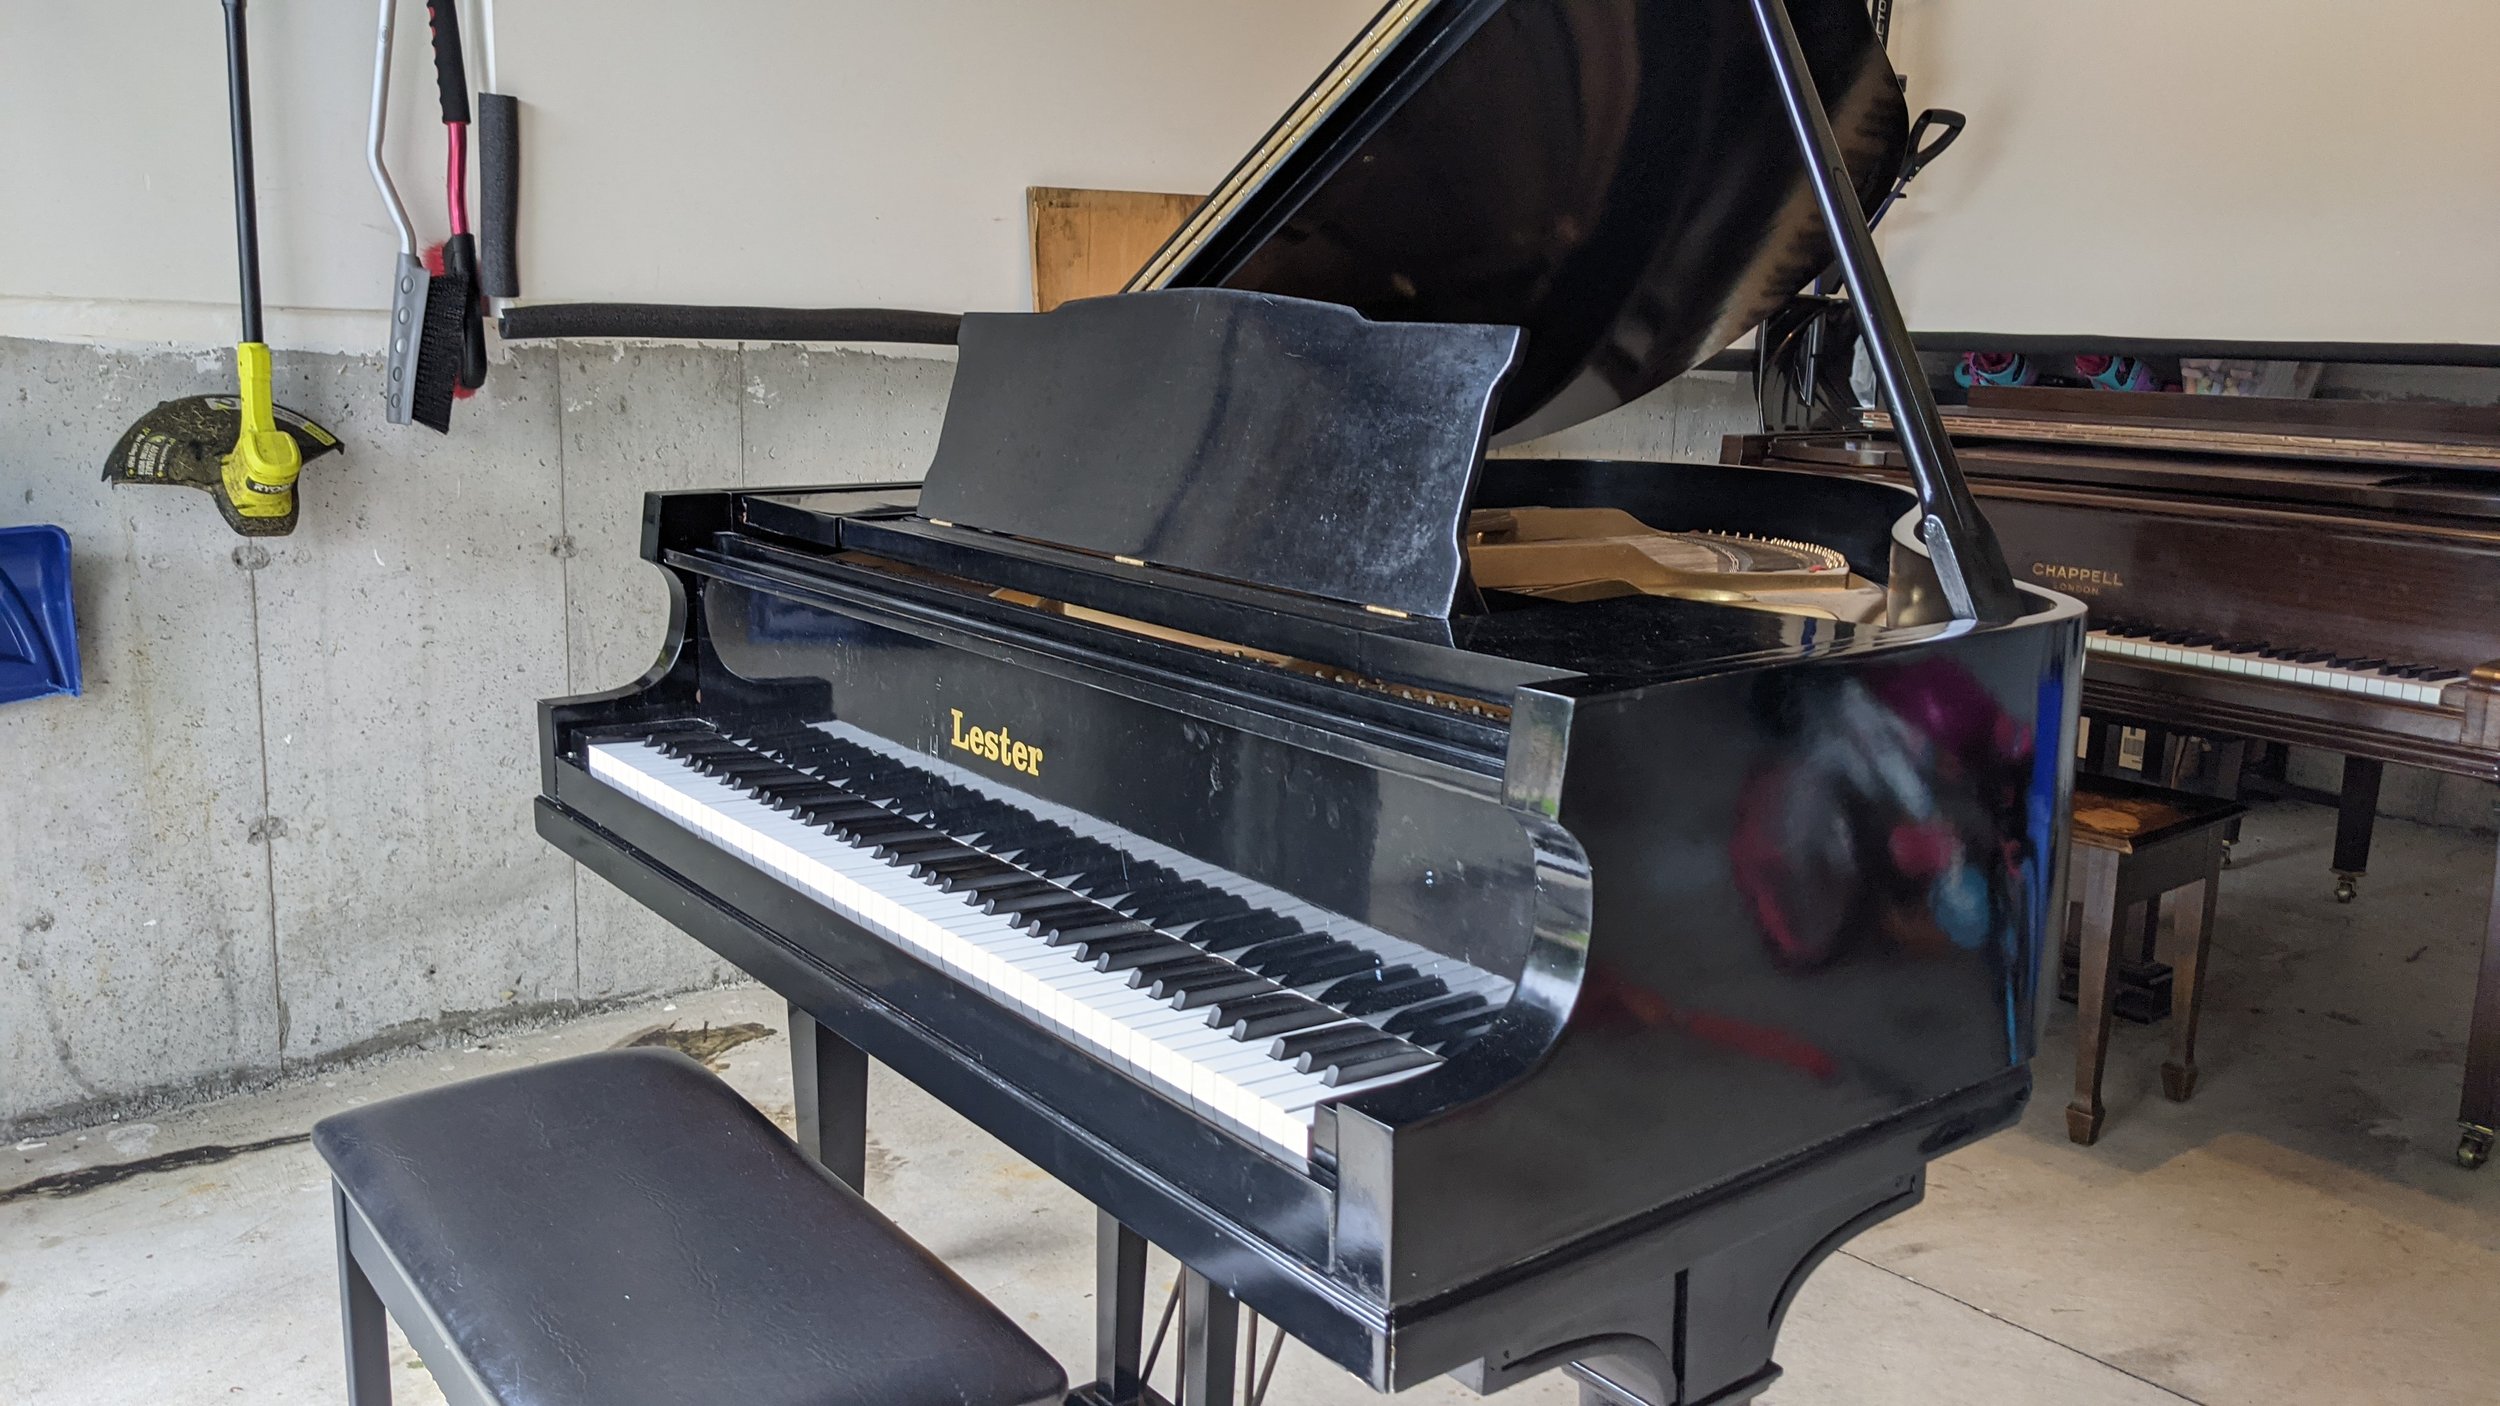 Lester baby grand piano for sale3.jpg